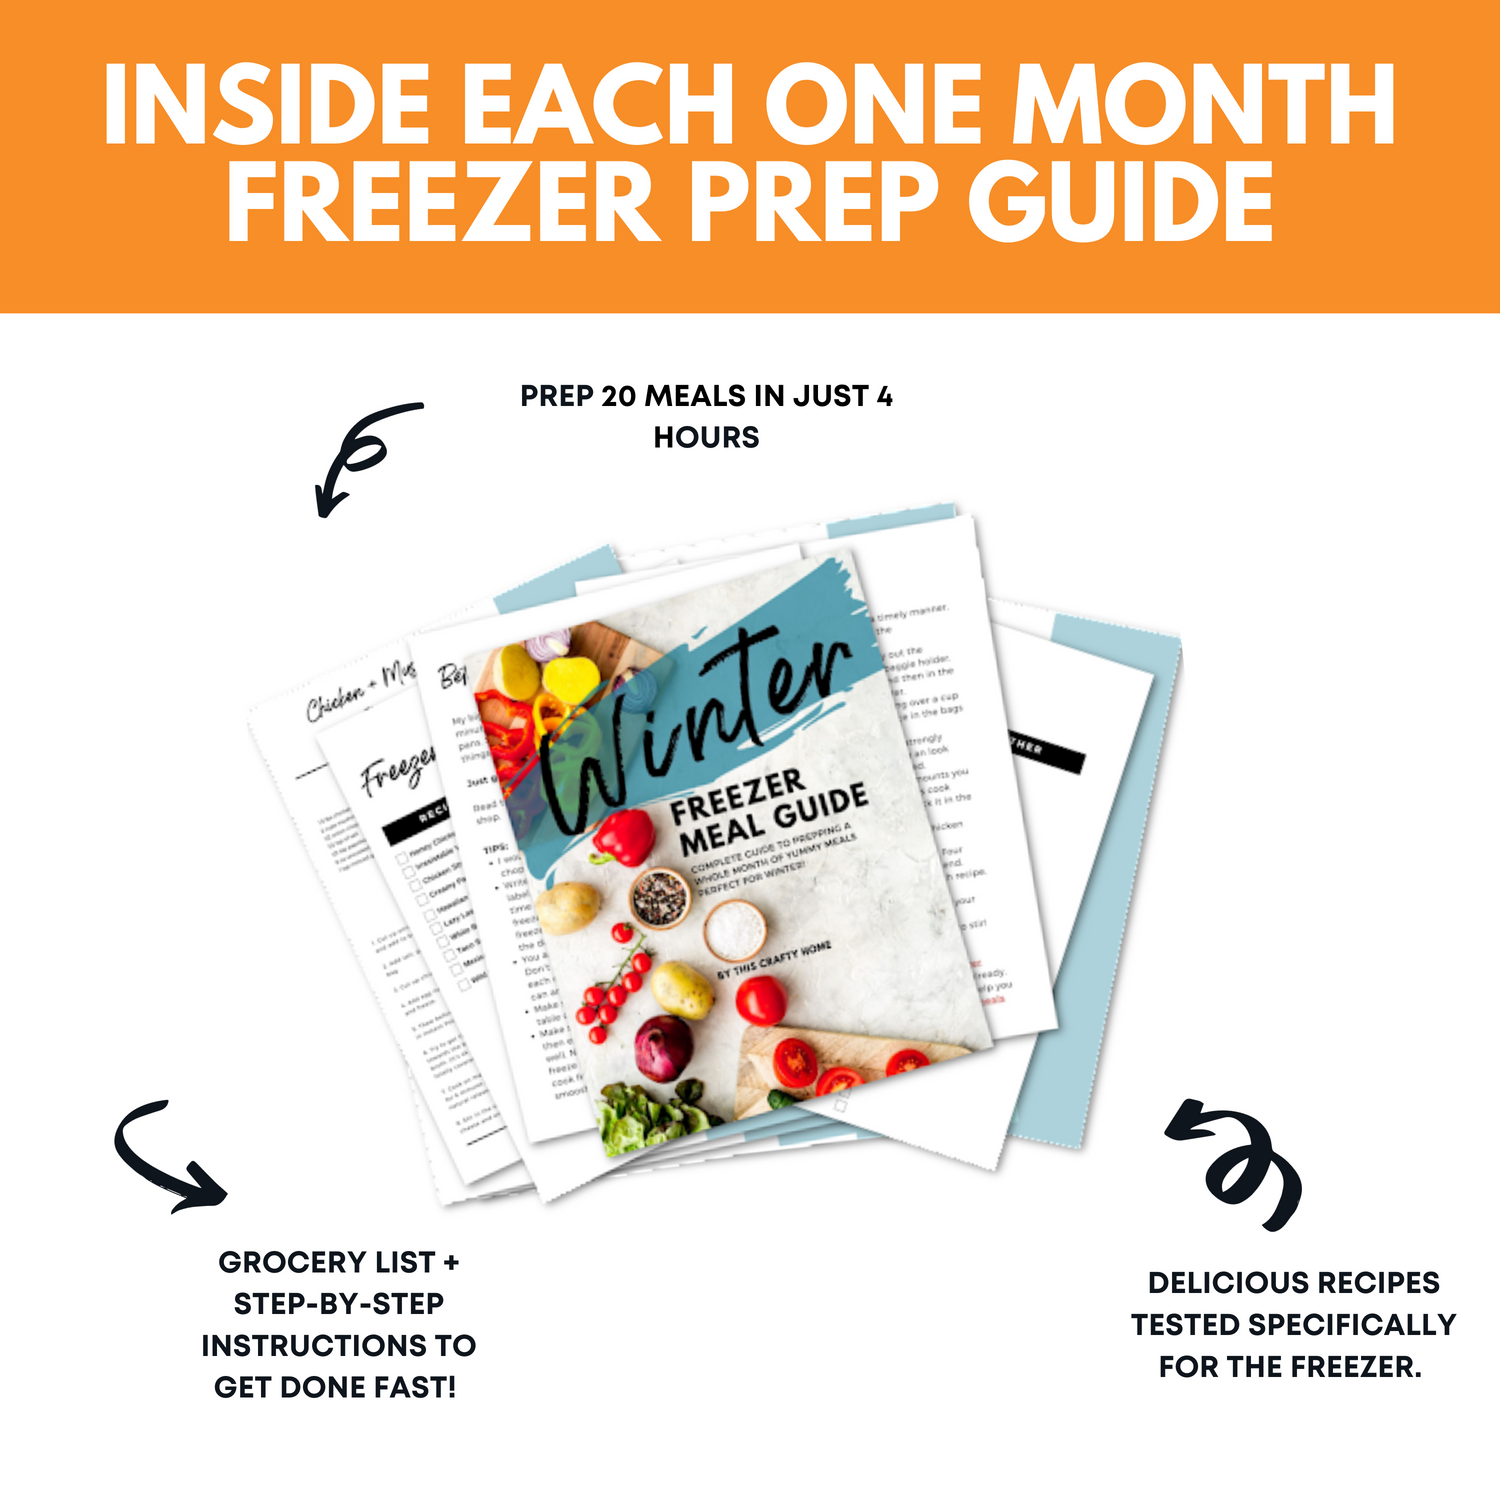 Winter and Fall Freezer Meal Guide Bundle